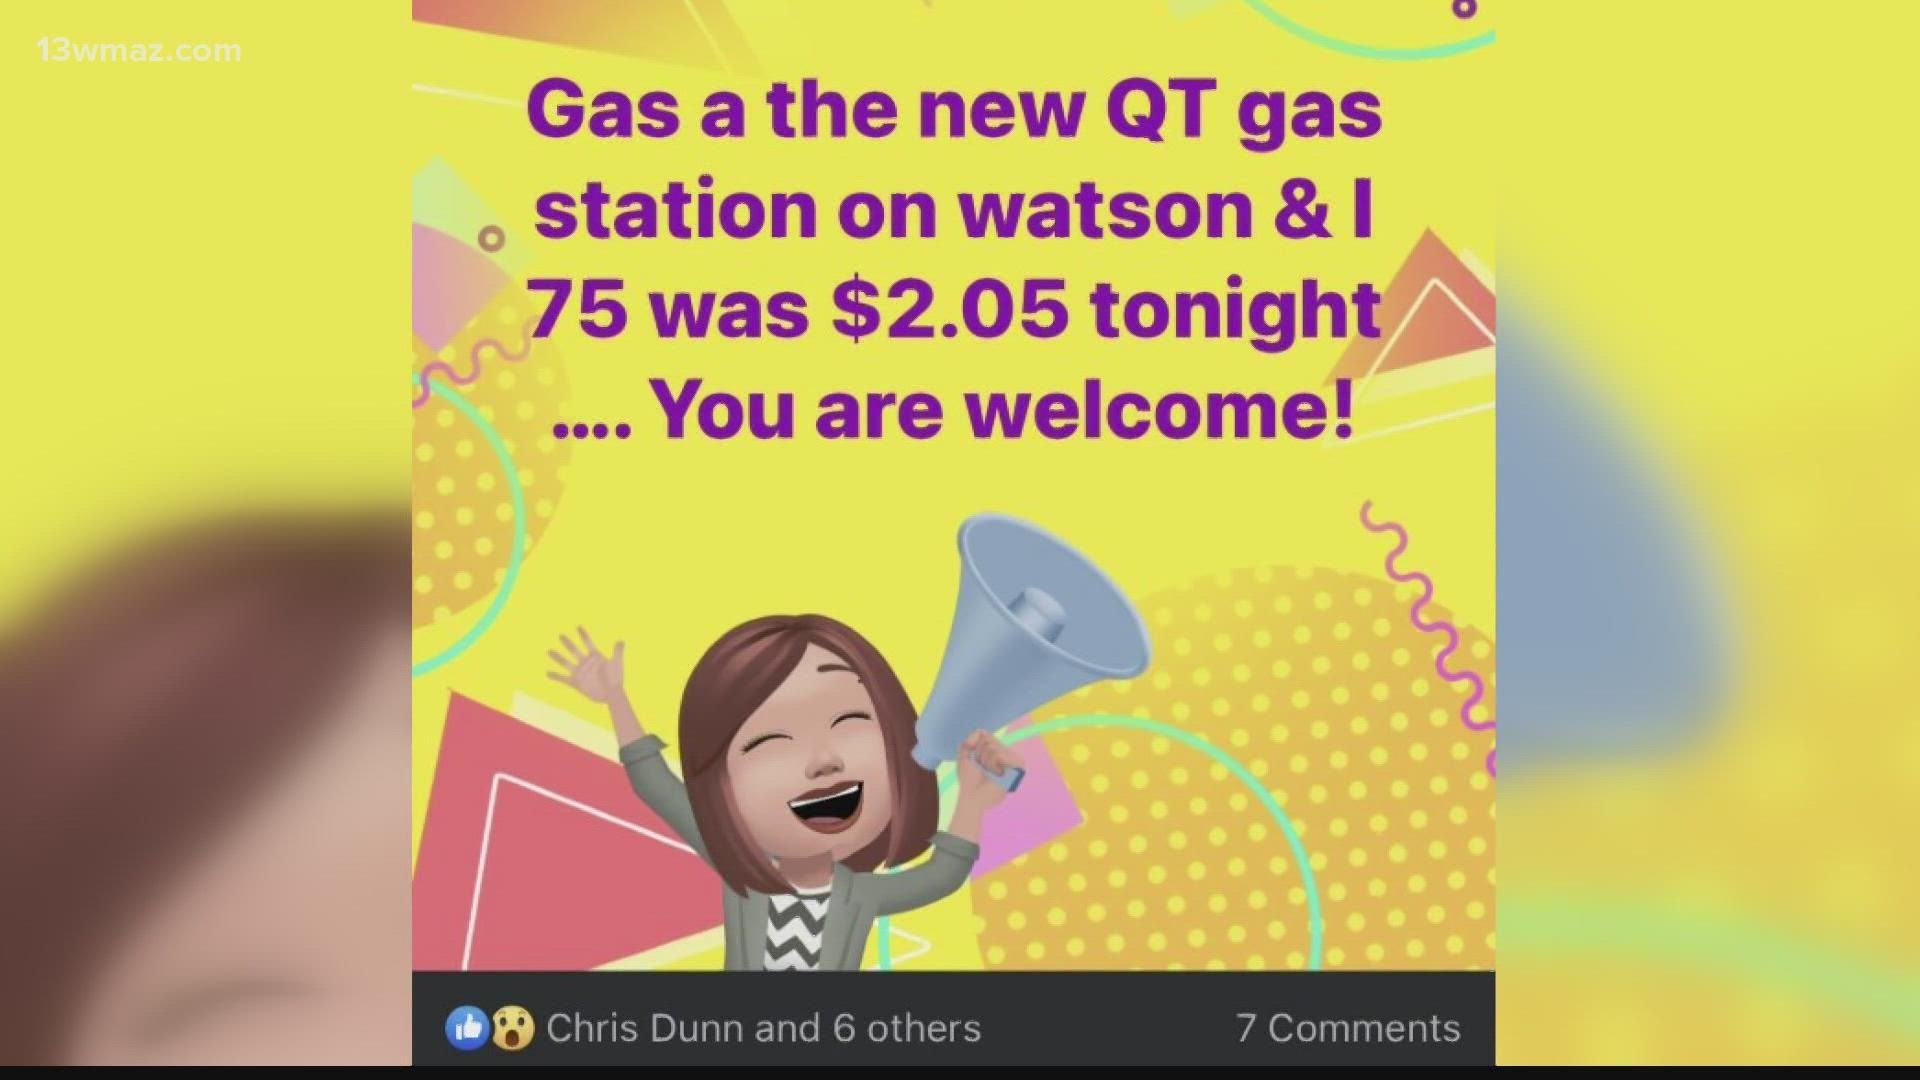 Prices at these stations dropped under $2 per gallon!